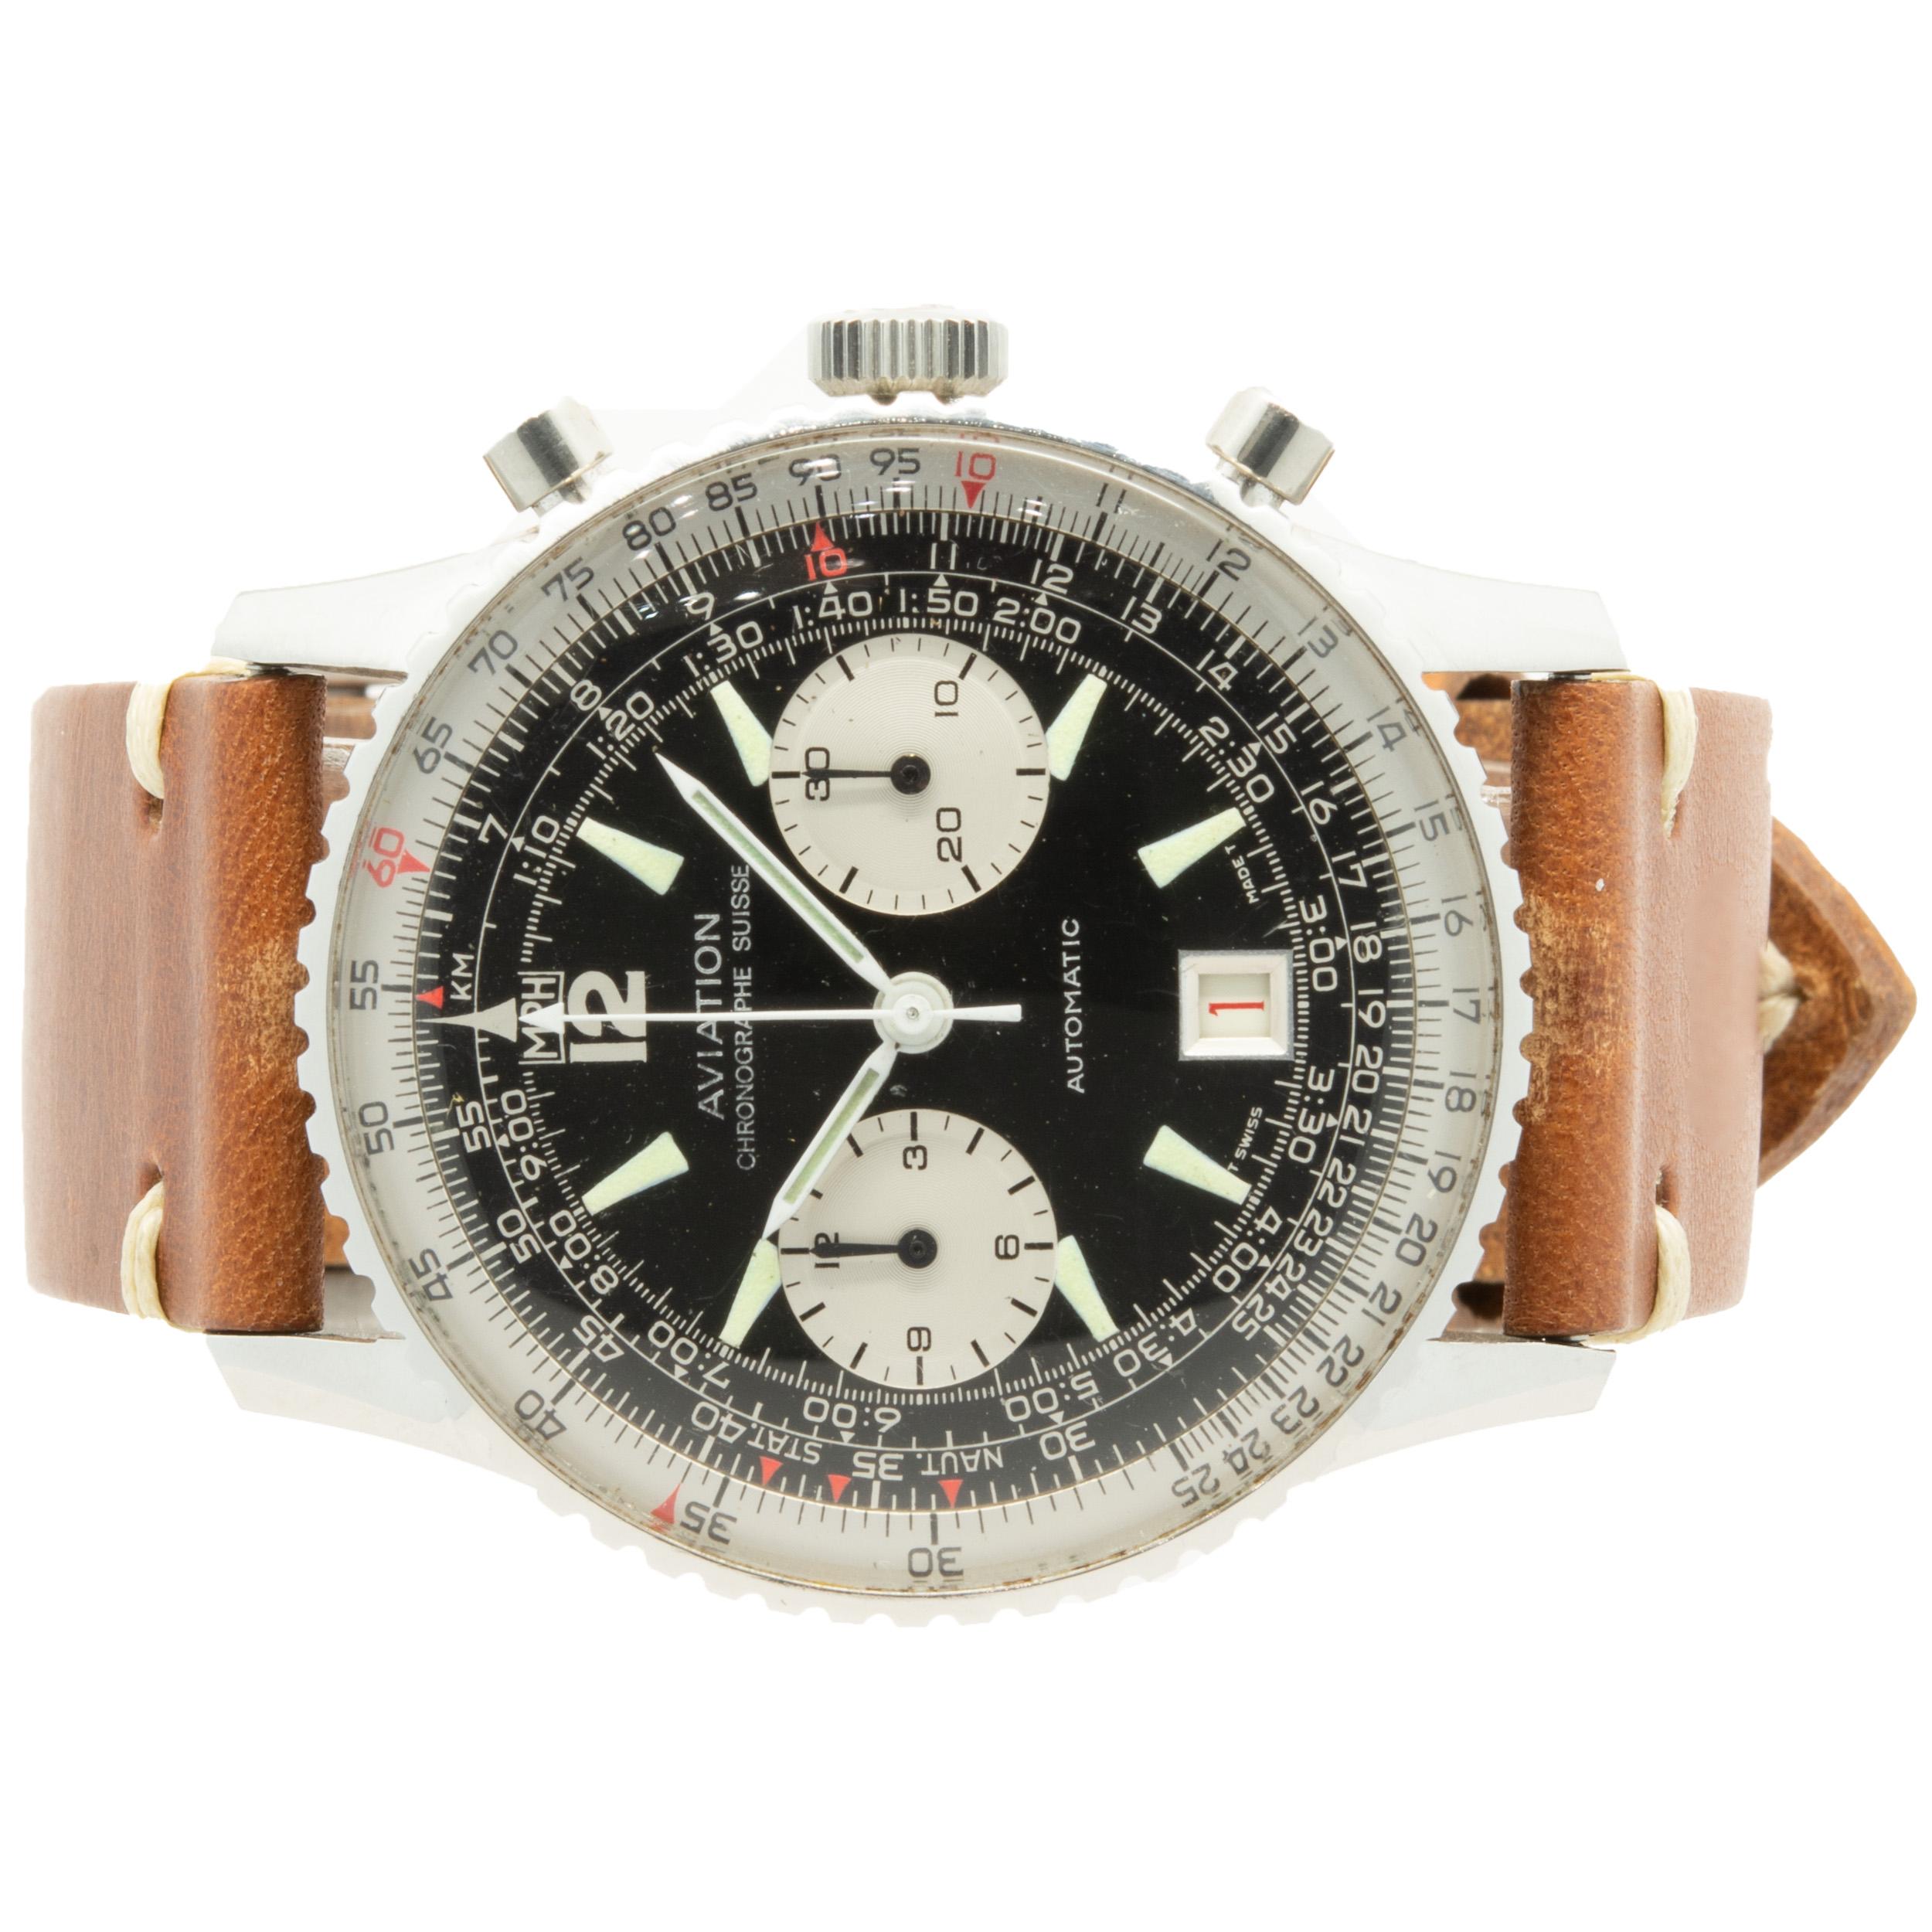 Movement: automatic
Function: hours, minutes, seconds, date, chronograph
Case: round 40mm case, coin trimmed tachymeter bezel, sapphire crystal, Breitling engraved case-back, screw-down crown
Band: brown leather strap, buckle
Dial: black chronograph